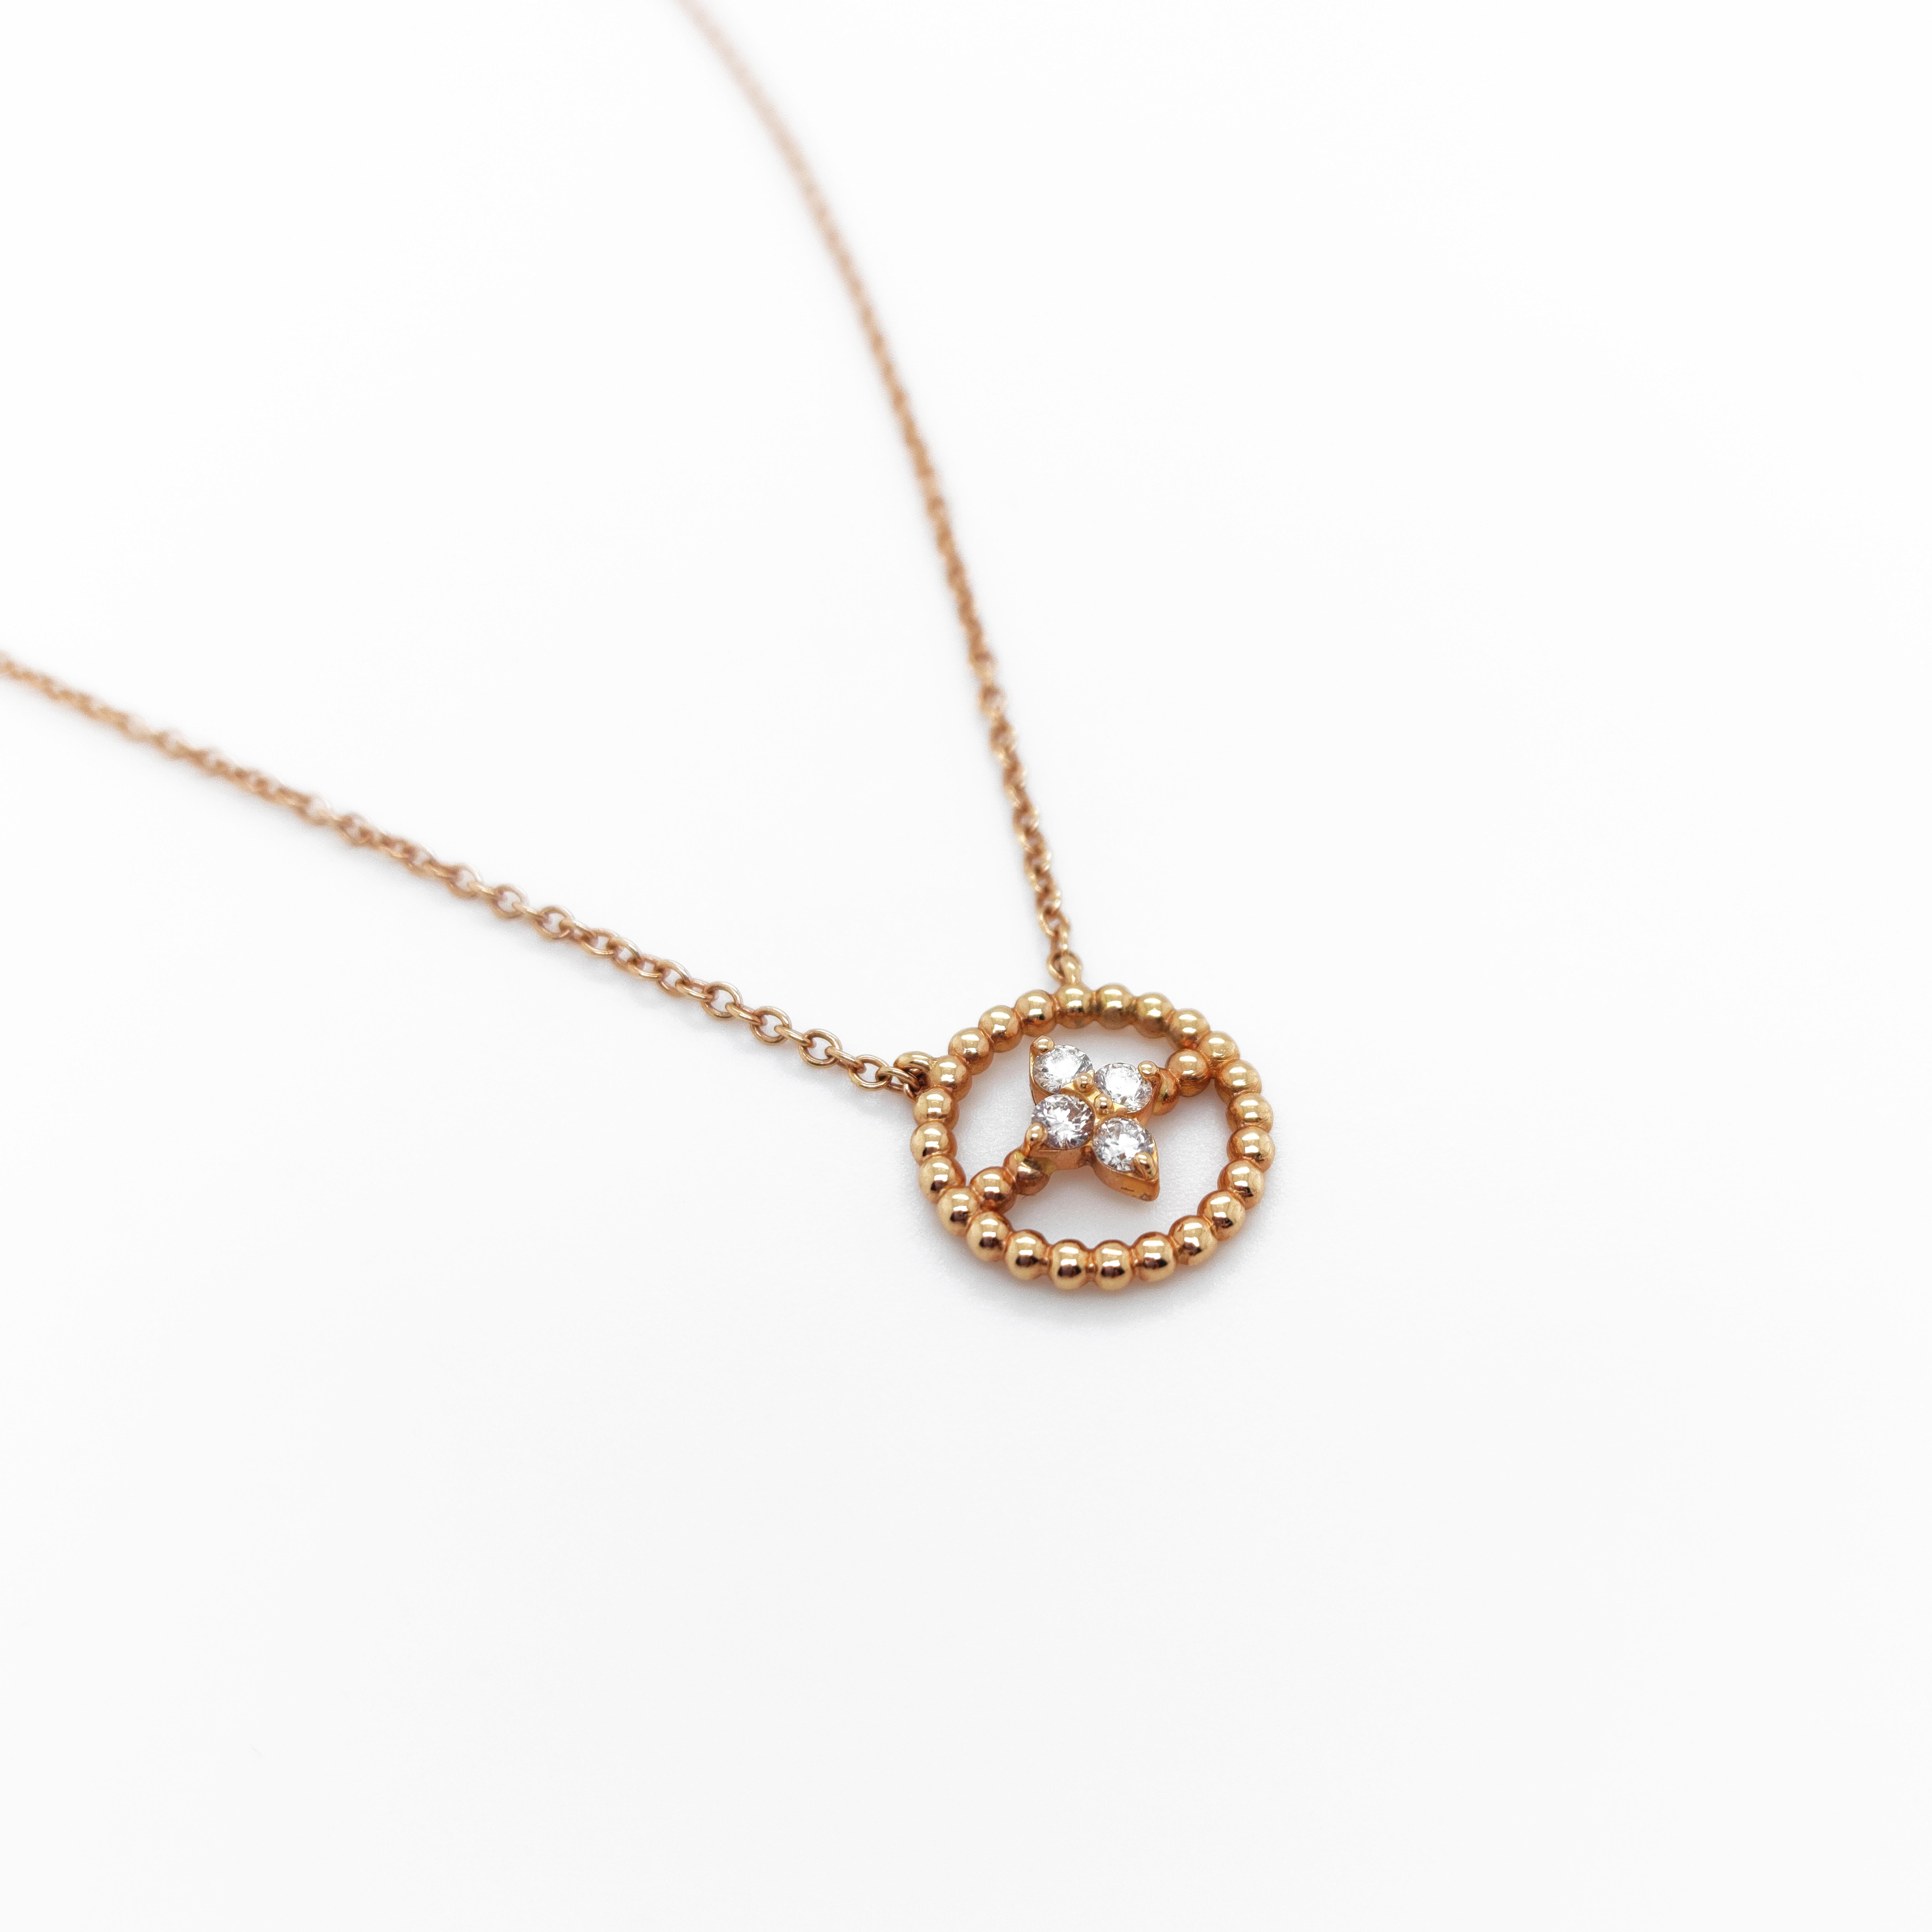 This 18KT rose gold & diamonds round necklace is easily worn everyday as it is light and sparkly! 
The circle gold ball design includes a diamond motif of 0,13 cts G-VS natural white diamonds.
This addition of diamonds to the necklace further